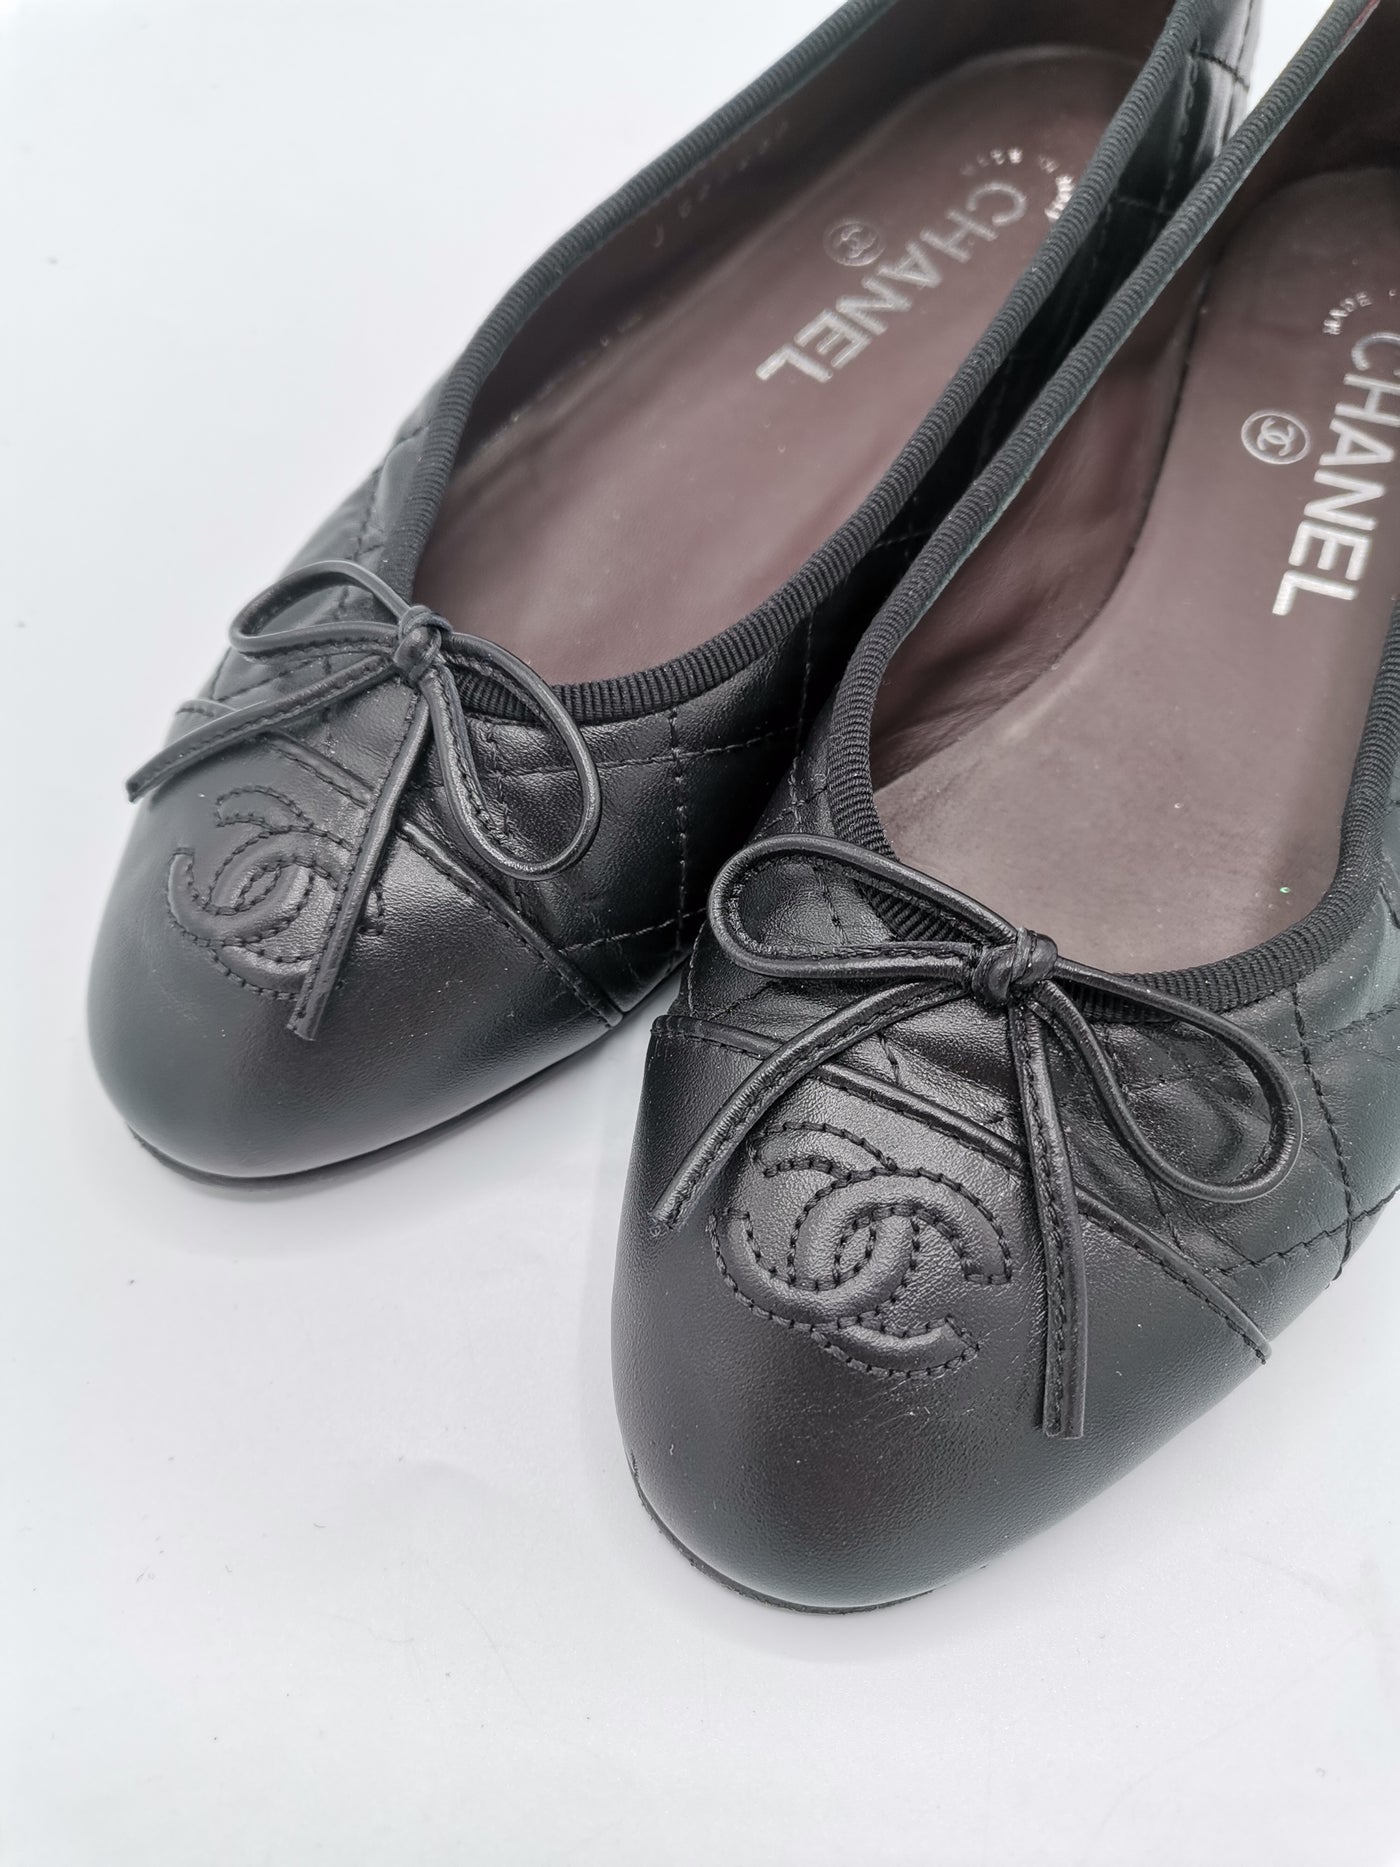 CHANEL quilted black ballet flats size 36 RRP: £680